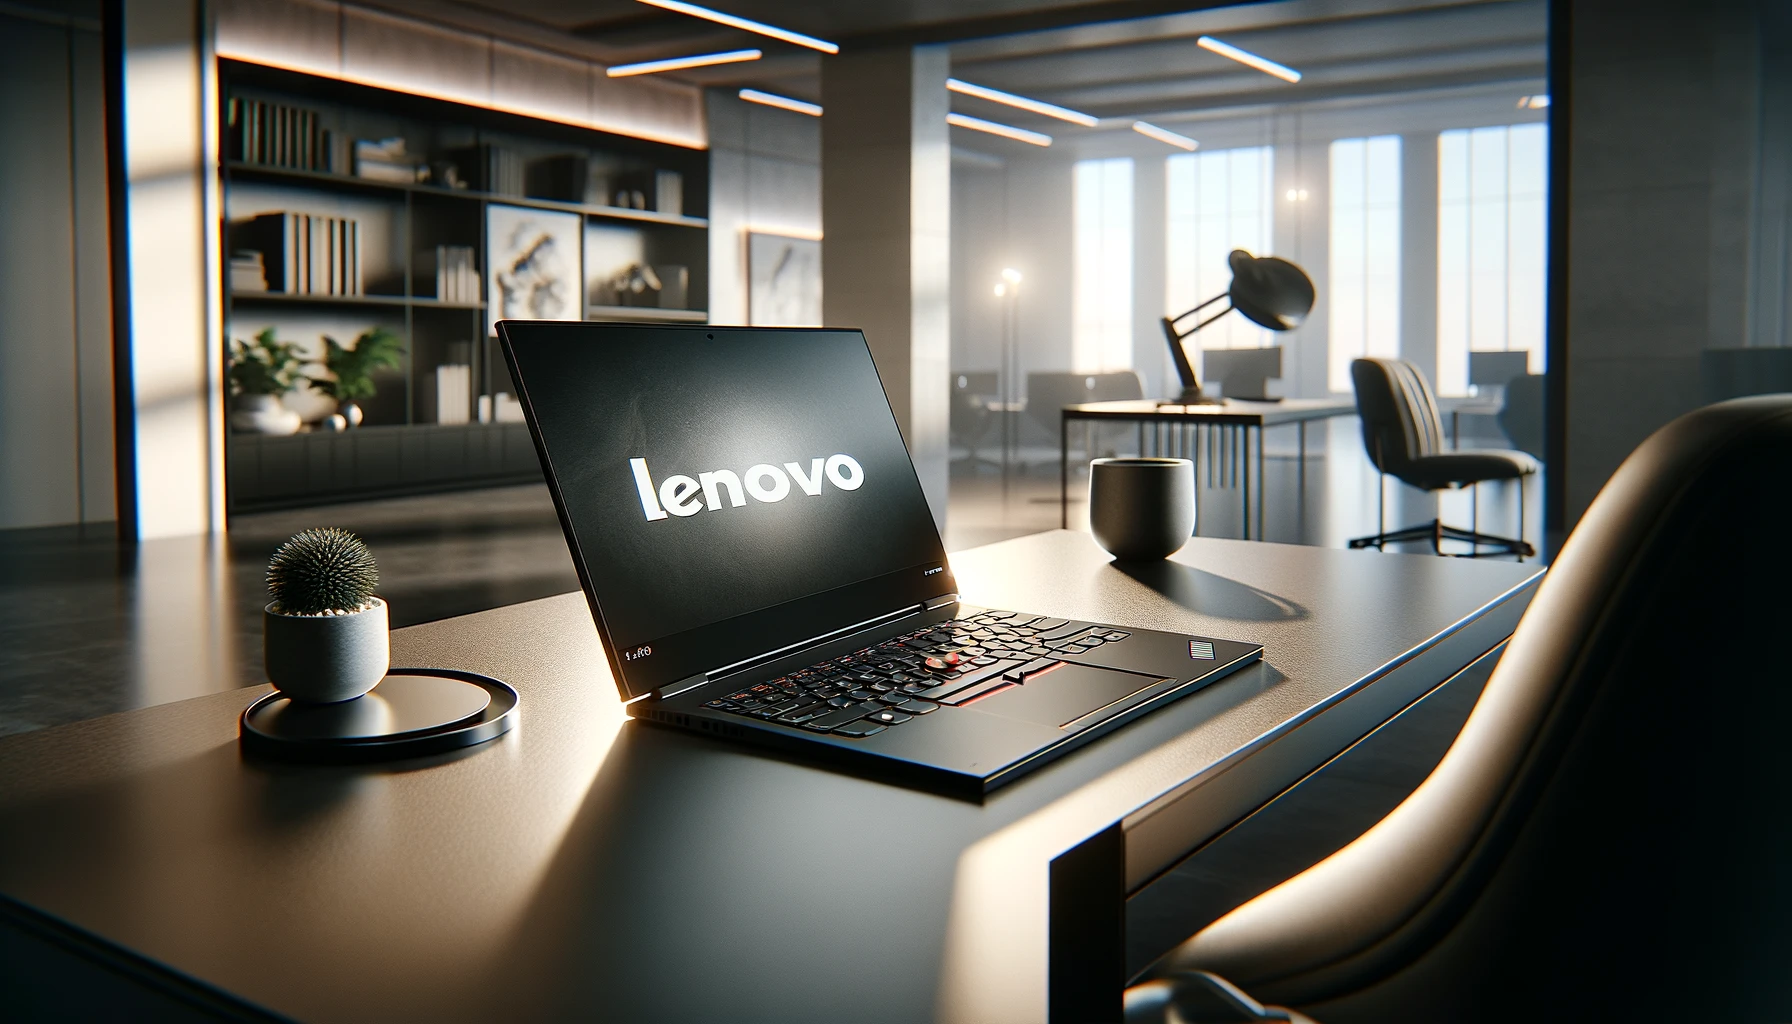 The image above features a 3D stock photo showcasing a Lenovo computer setup in a modern office environment, highlighting the brand's dedication to delivering professional computing solutions within a sophisticated workspace.